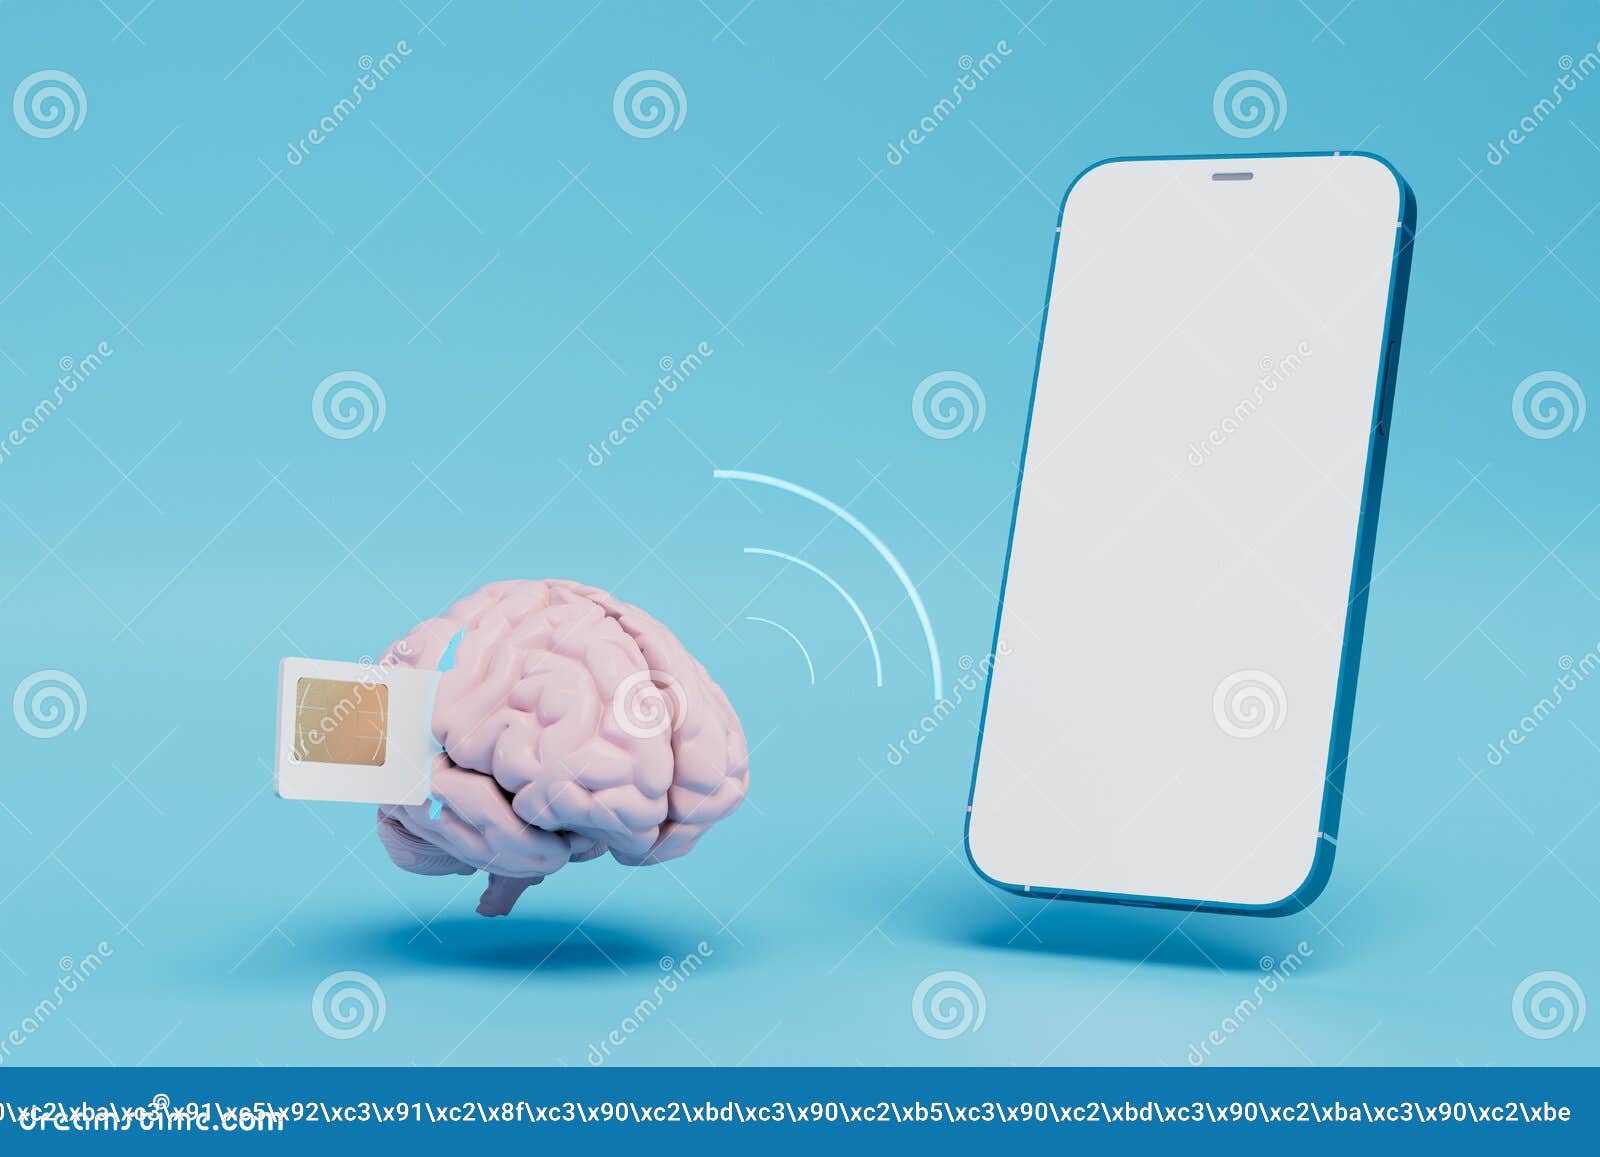 memorization of information from the sim card. brain with a sim card and a wi-fi icon and a smartphone. 3d render